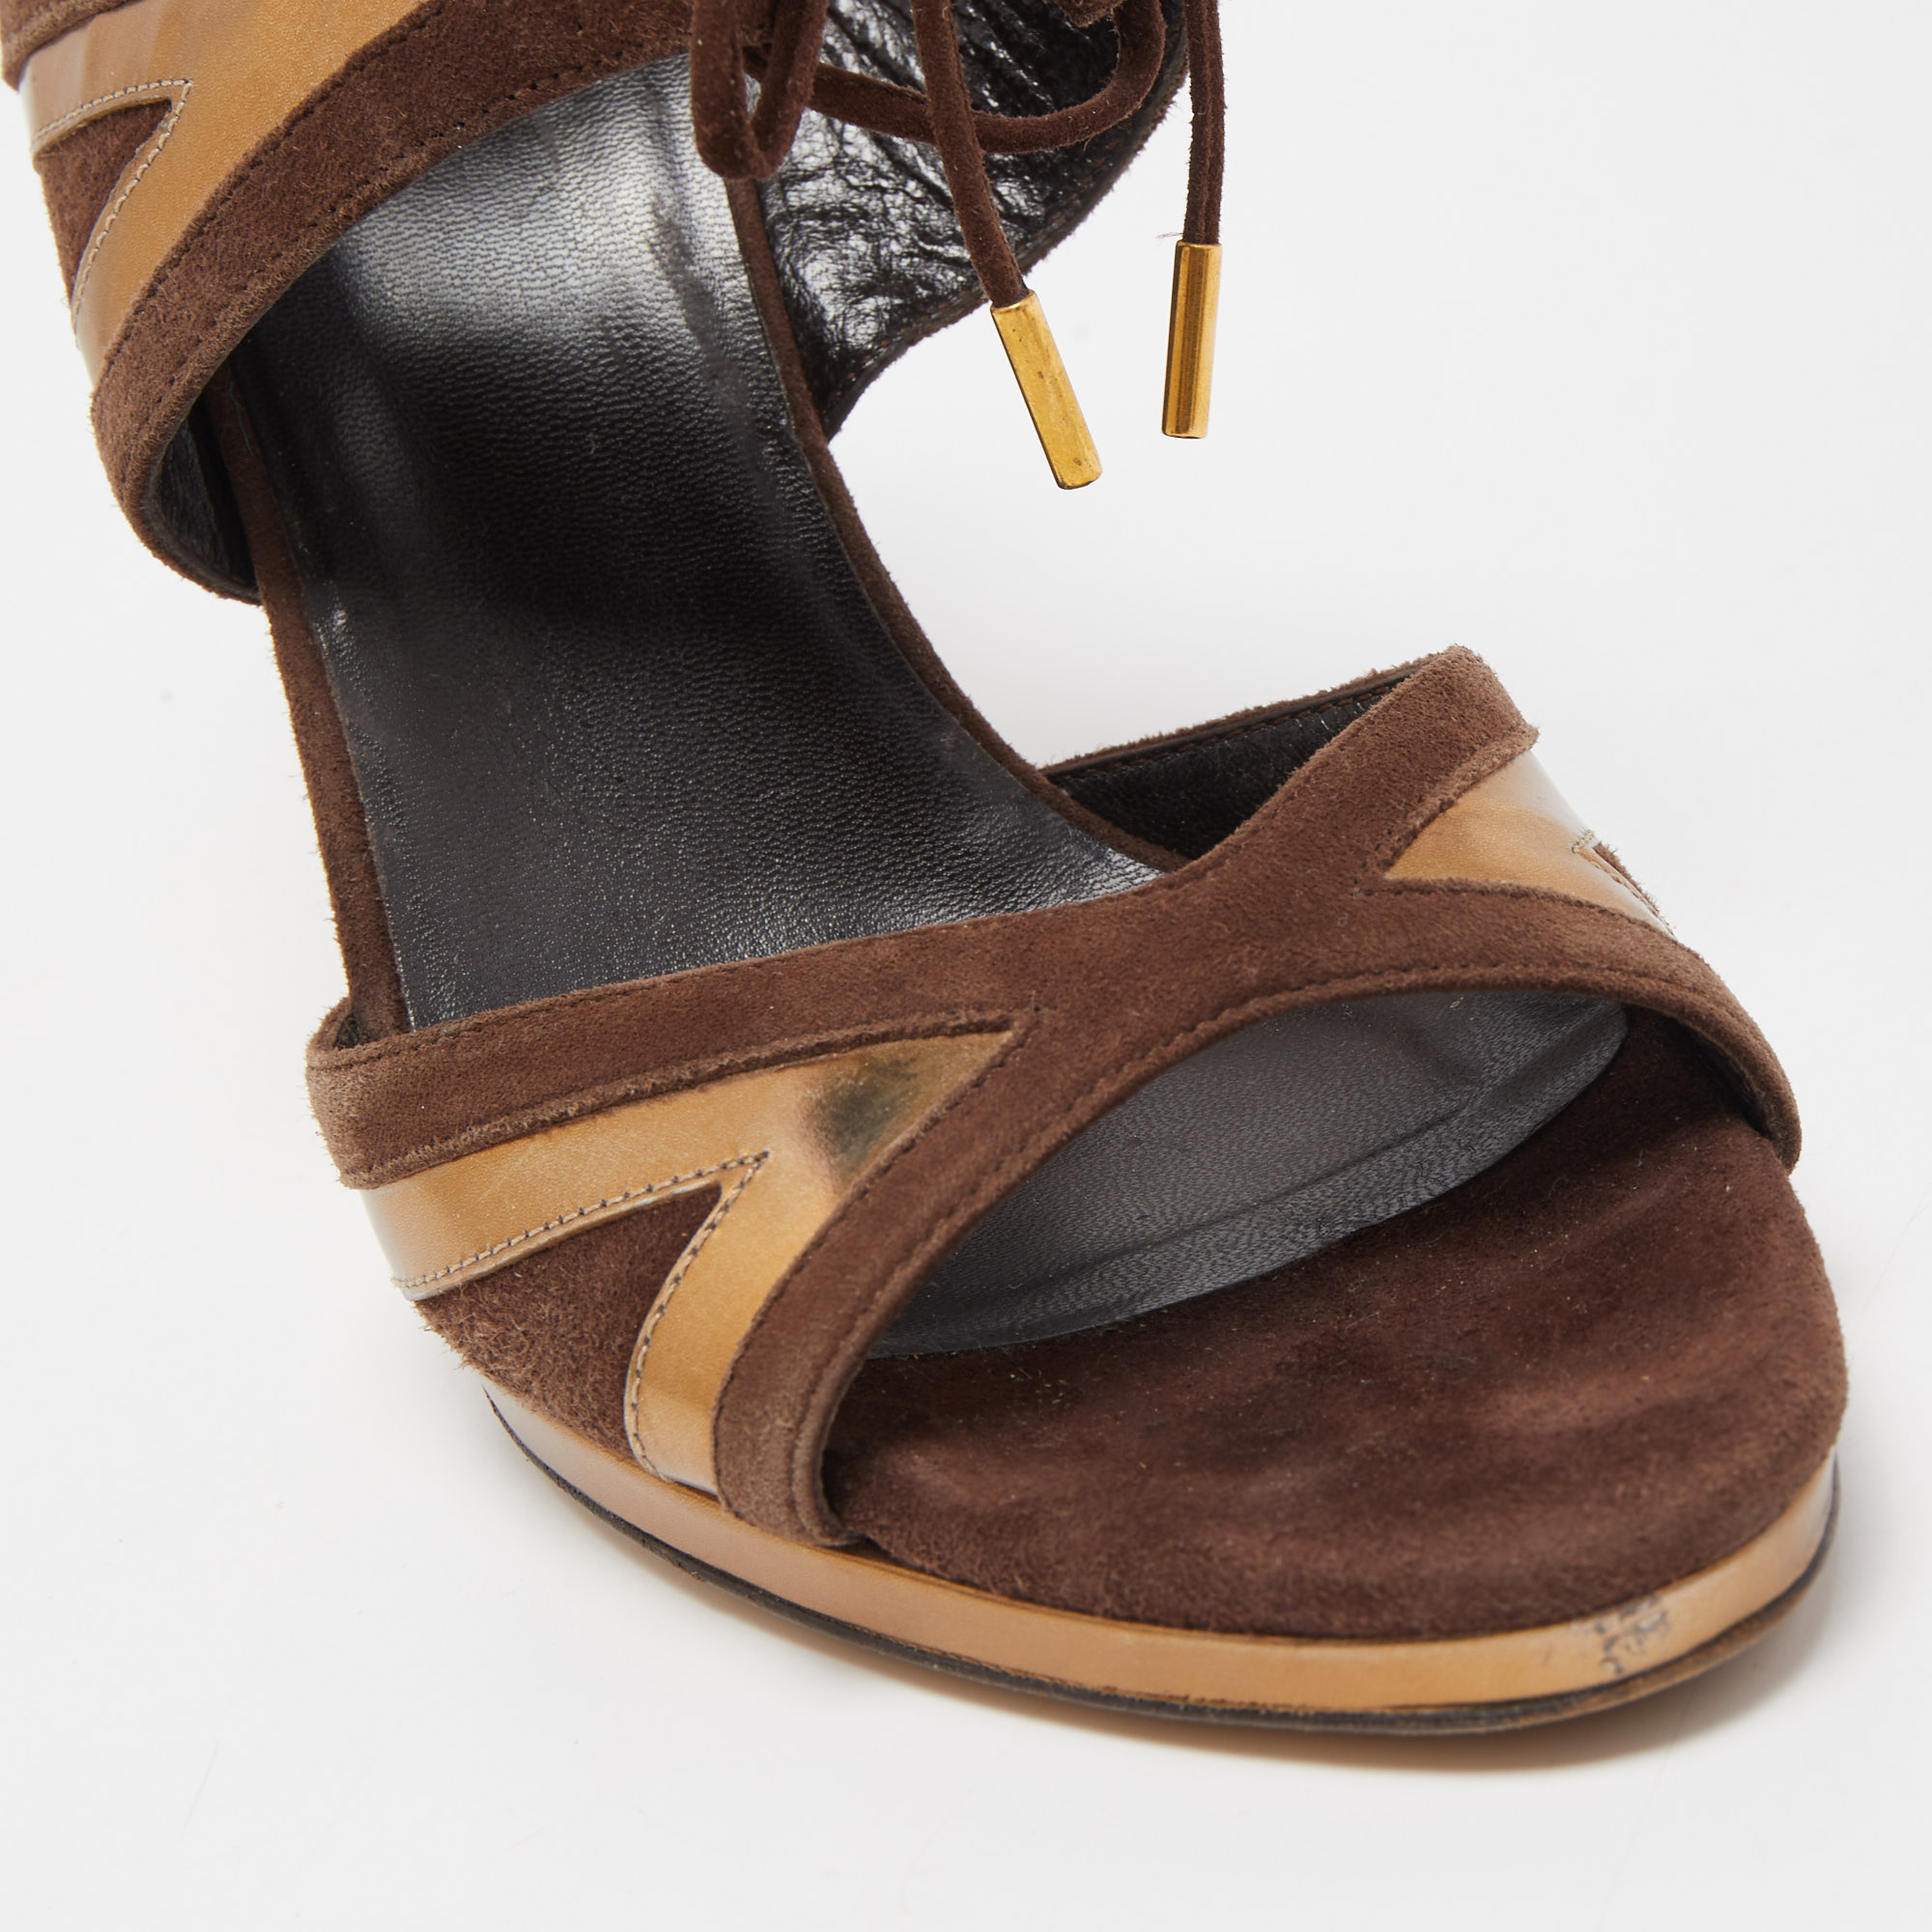 Gucci Brown/Gold Suede And Leather Ankle Tie Sandals Size 37.5